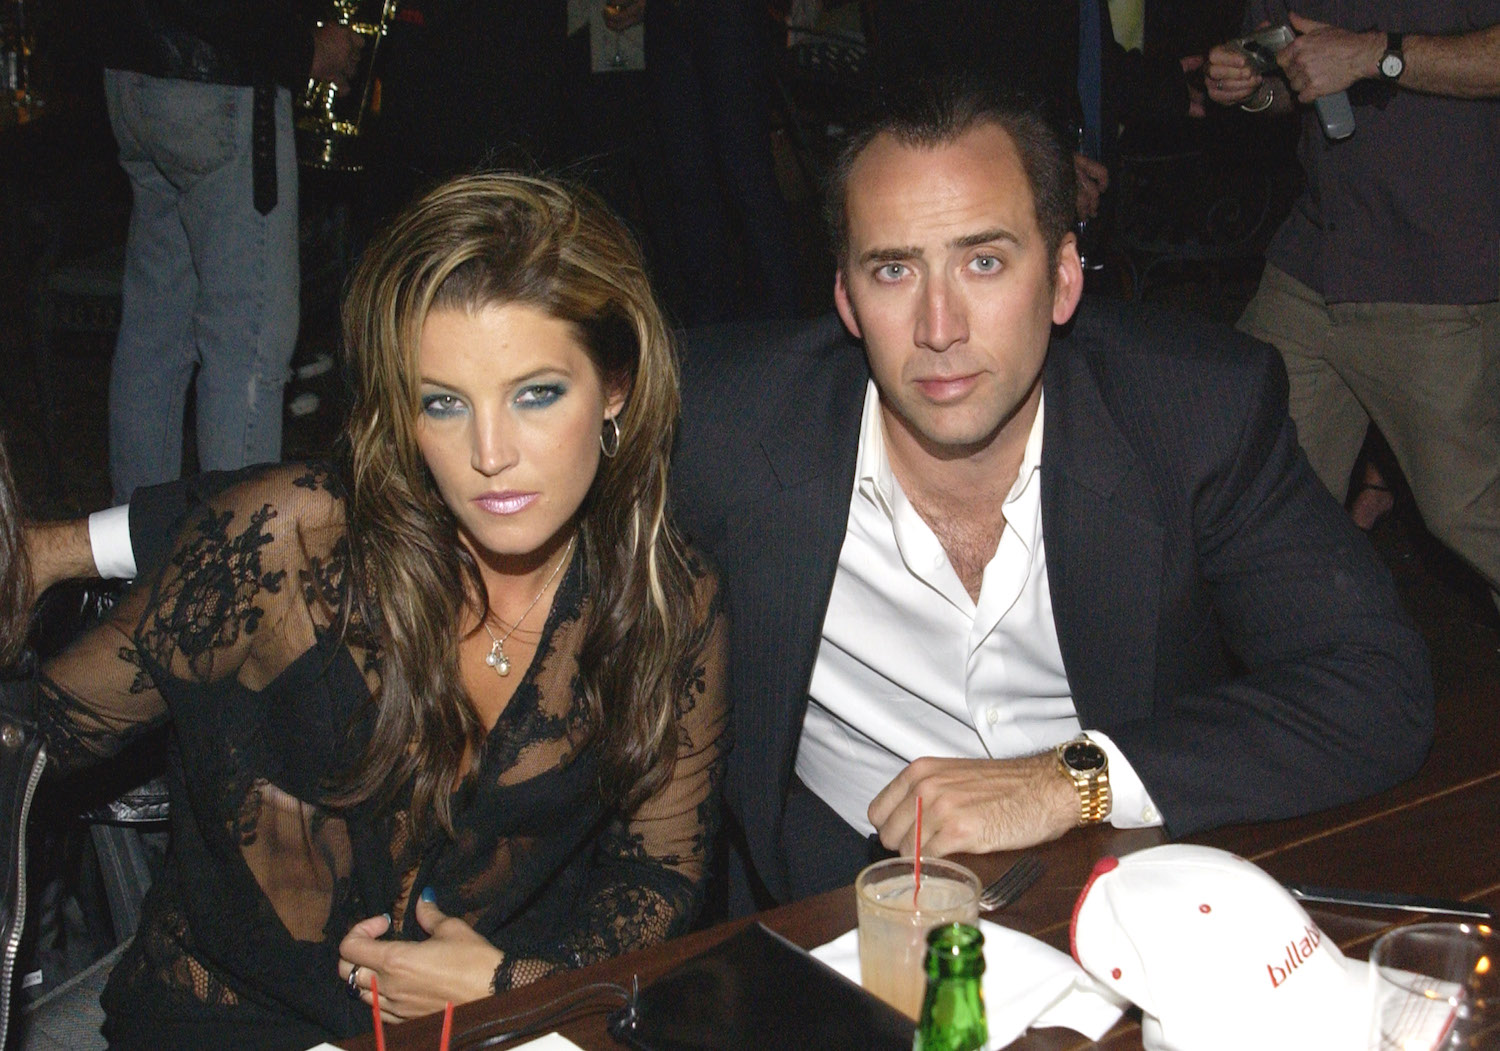 Lisa Marie Presley and Nicolas Cage sitting next to each other against a dark background